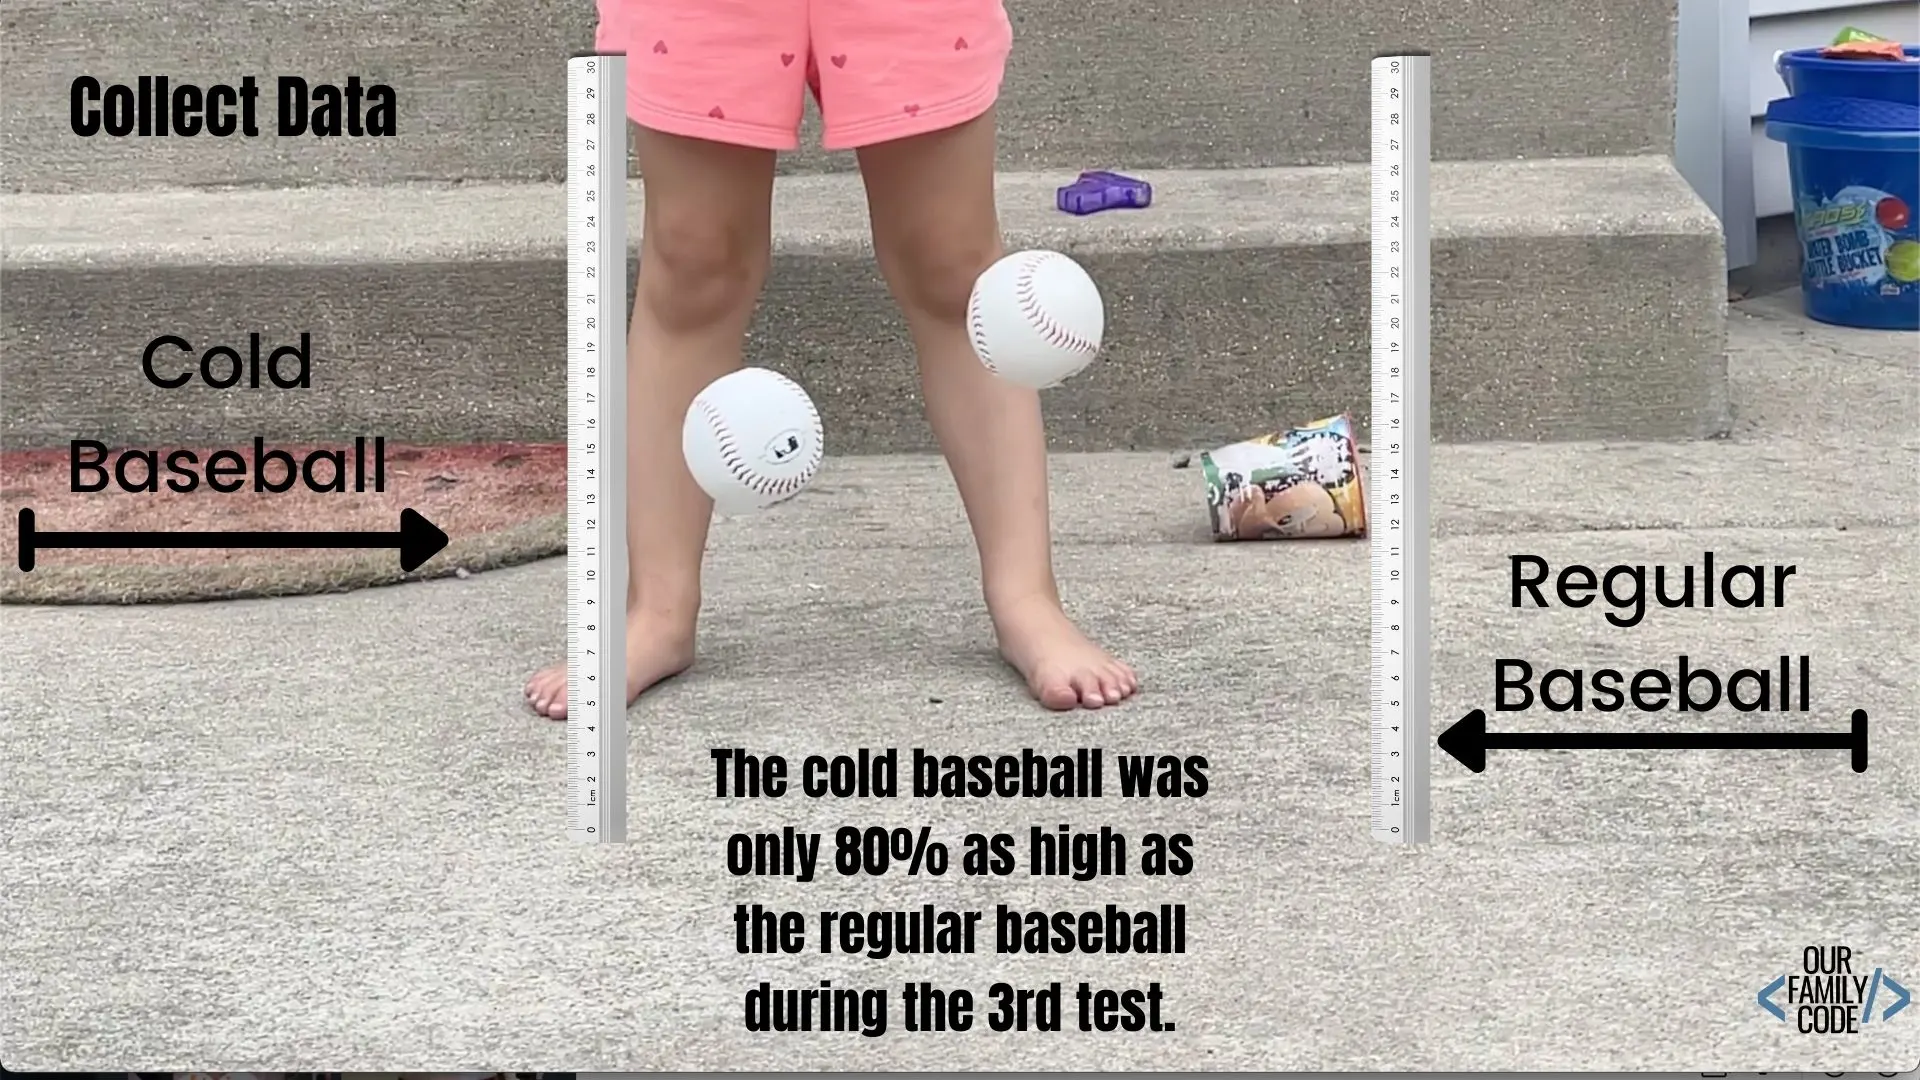 A picture of a frozen baseball science experiment test results for 3rd attempt.